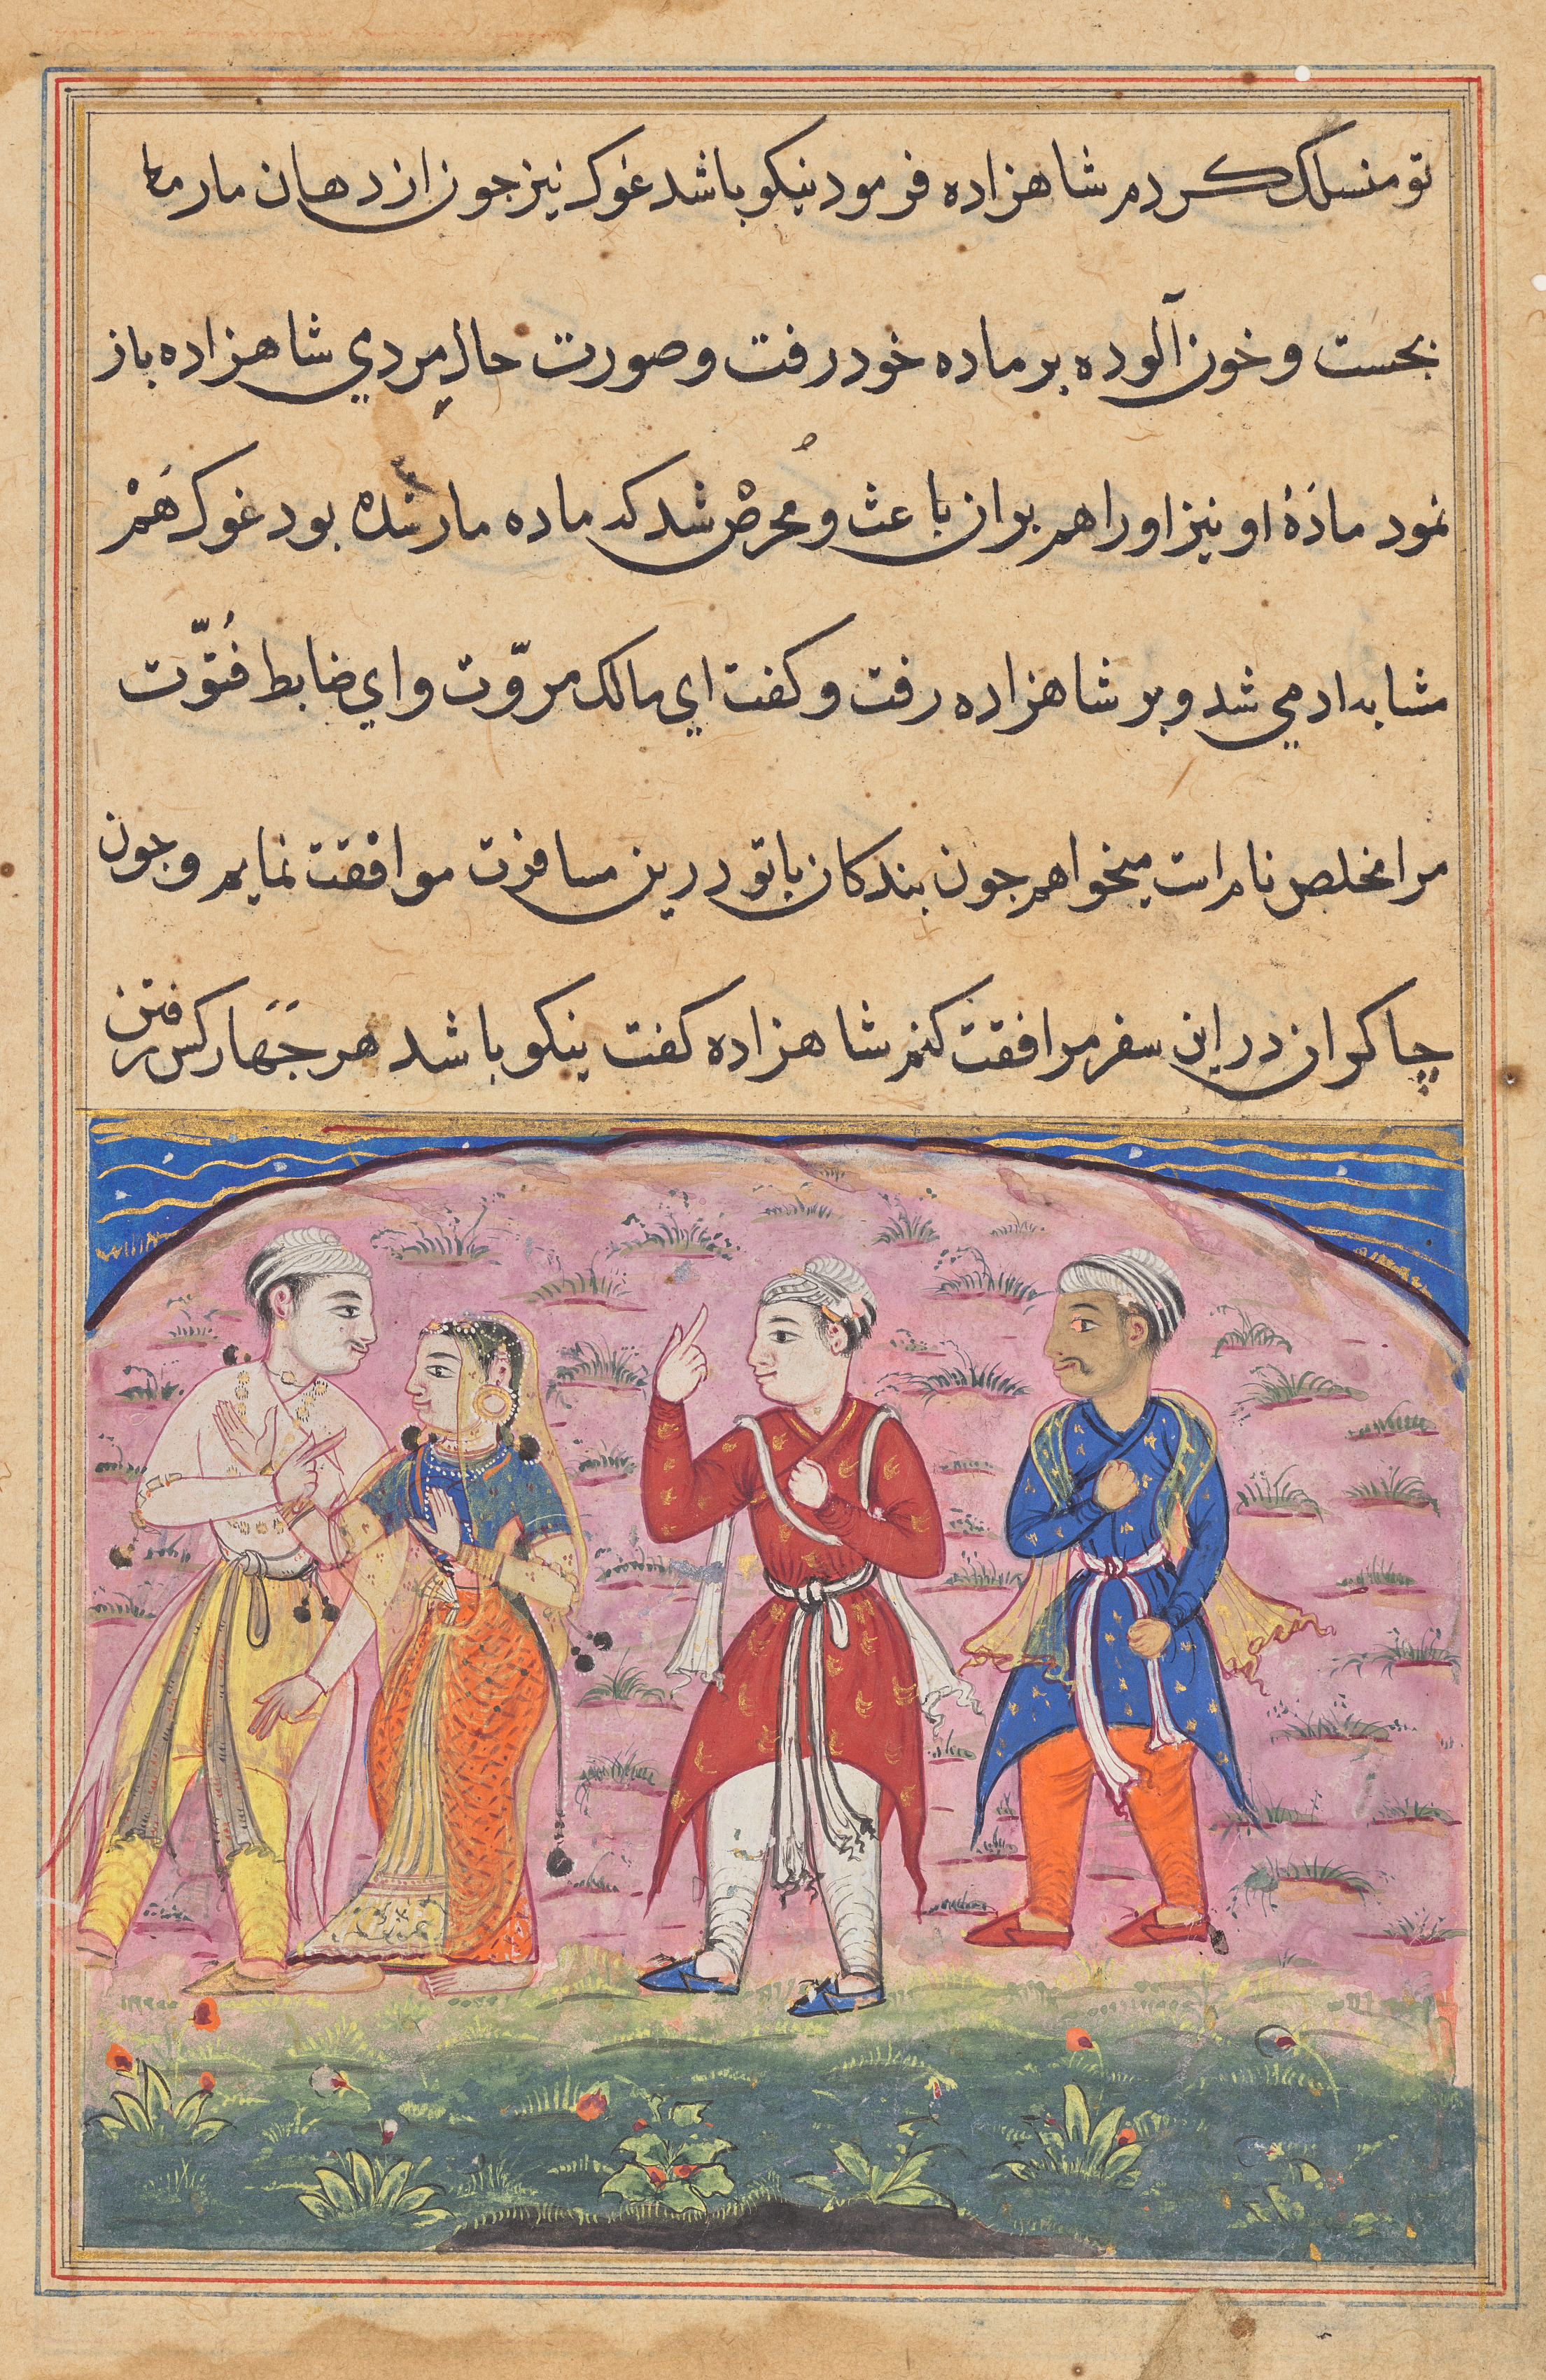 The prince and Nikfal are joined by Khalis and the Mukhlis who are the grateful snake and frog in human form, from a Tuti-nama (Tales of a Parrot): Eighteenth Night